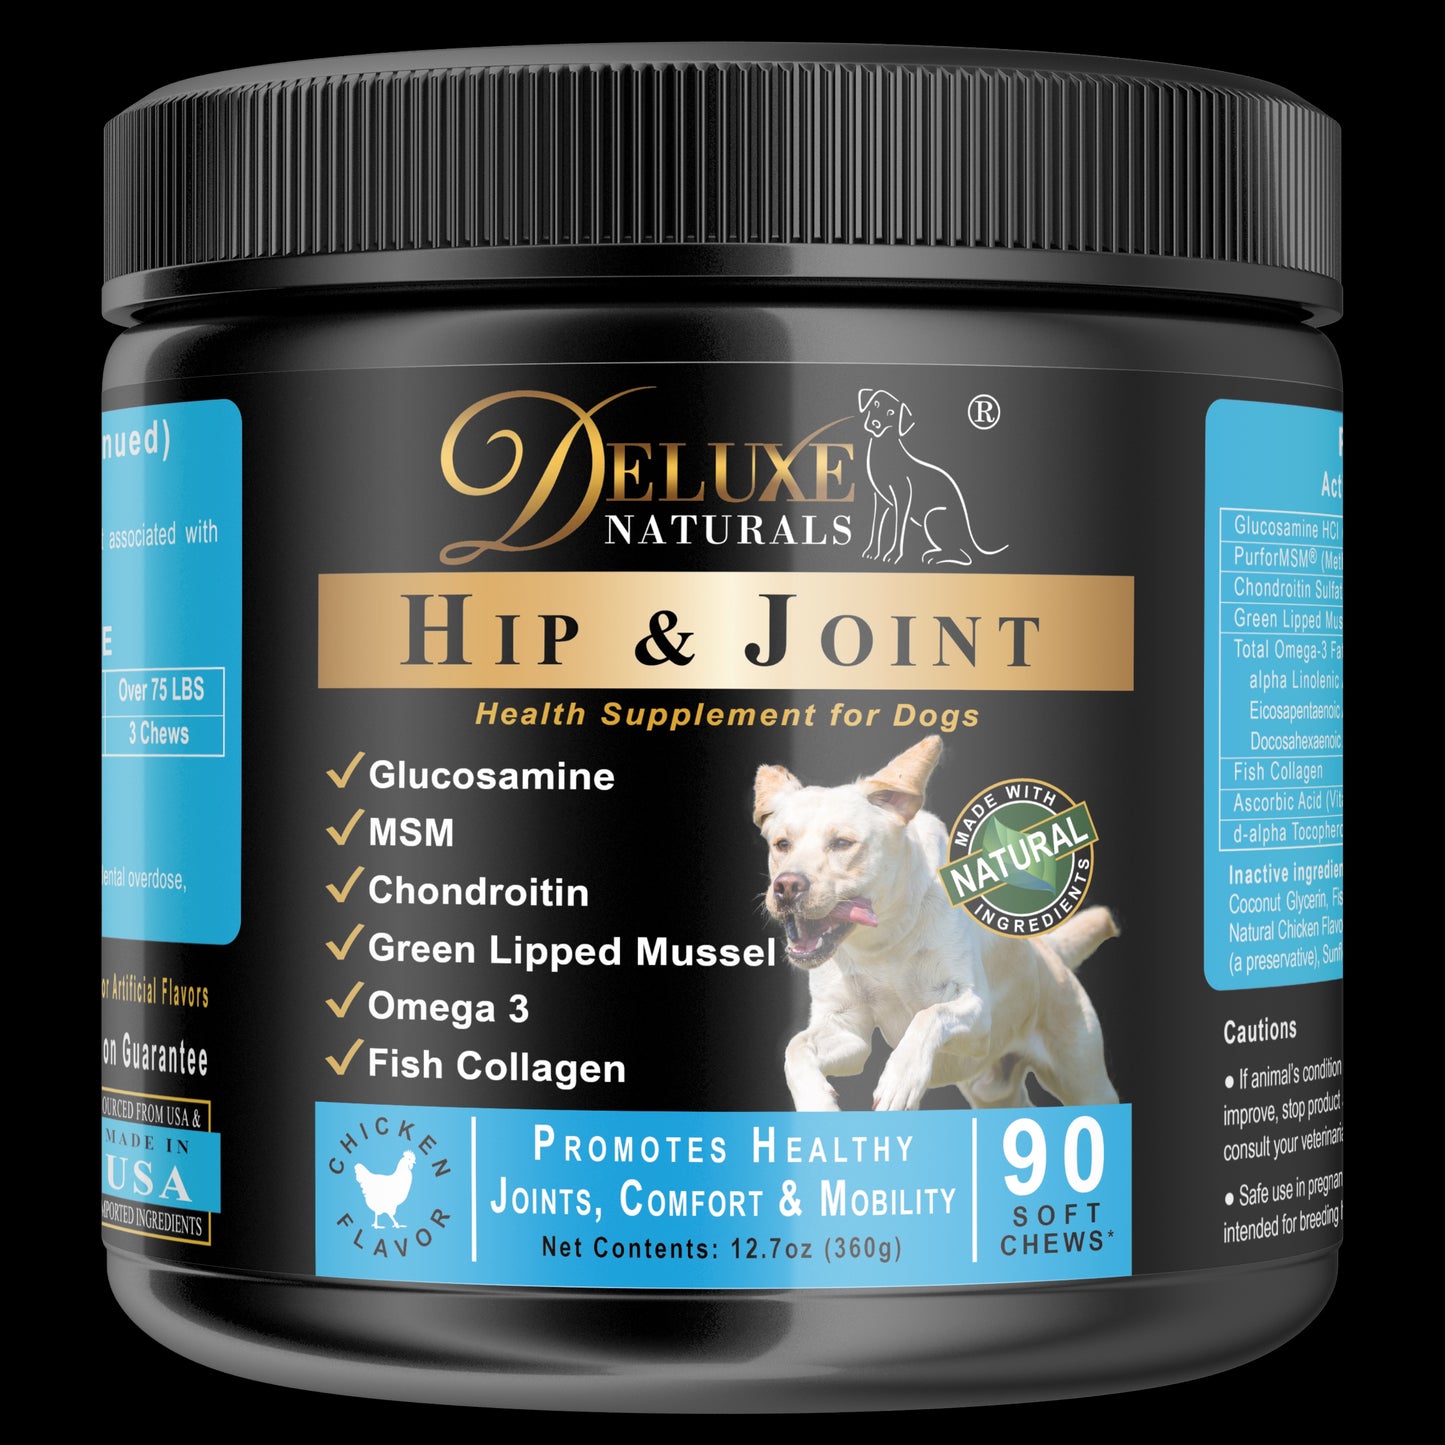 Deluxe Naturals Hip and Joint Soft Chews for Dogs - 90 Count (Pack of 1)